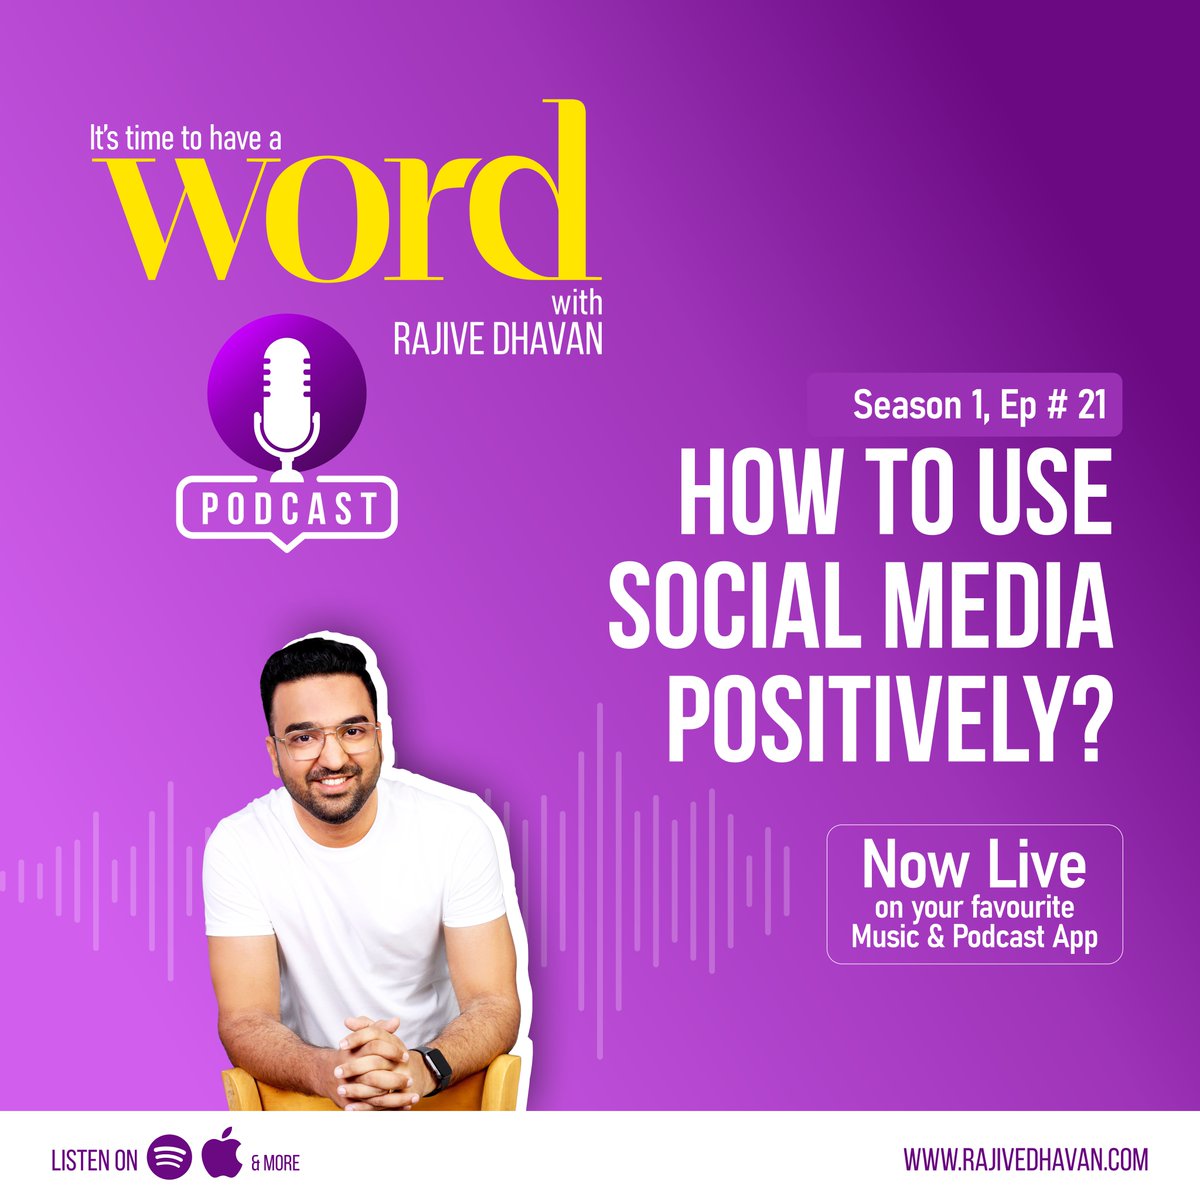 Podcast: Word with Rajive Dhavan 
Ep # 21: How to use social media positively? (Now Live) 

Podcast Link: linktr.ee/rajivedhavan

Do check it out on all the leading Music & Podcast Apps.
.
.
.
#Podcast #WordWithRajiveDhavan #SelfhelpPodcast #SocialMedia #SocialMediaAddiction